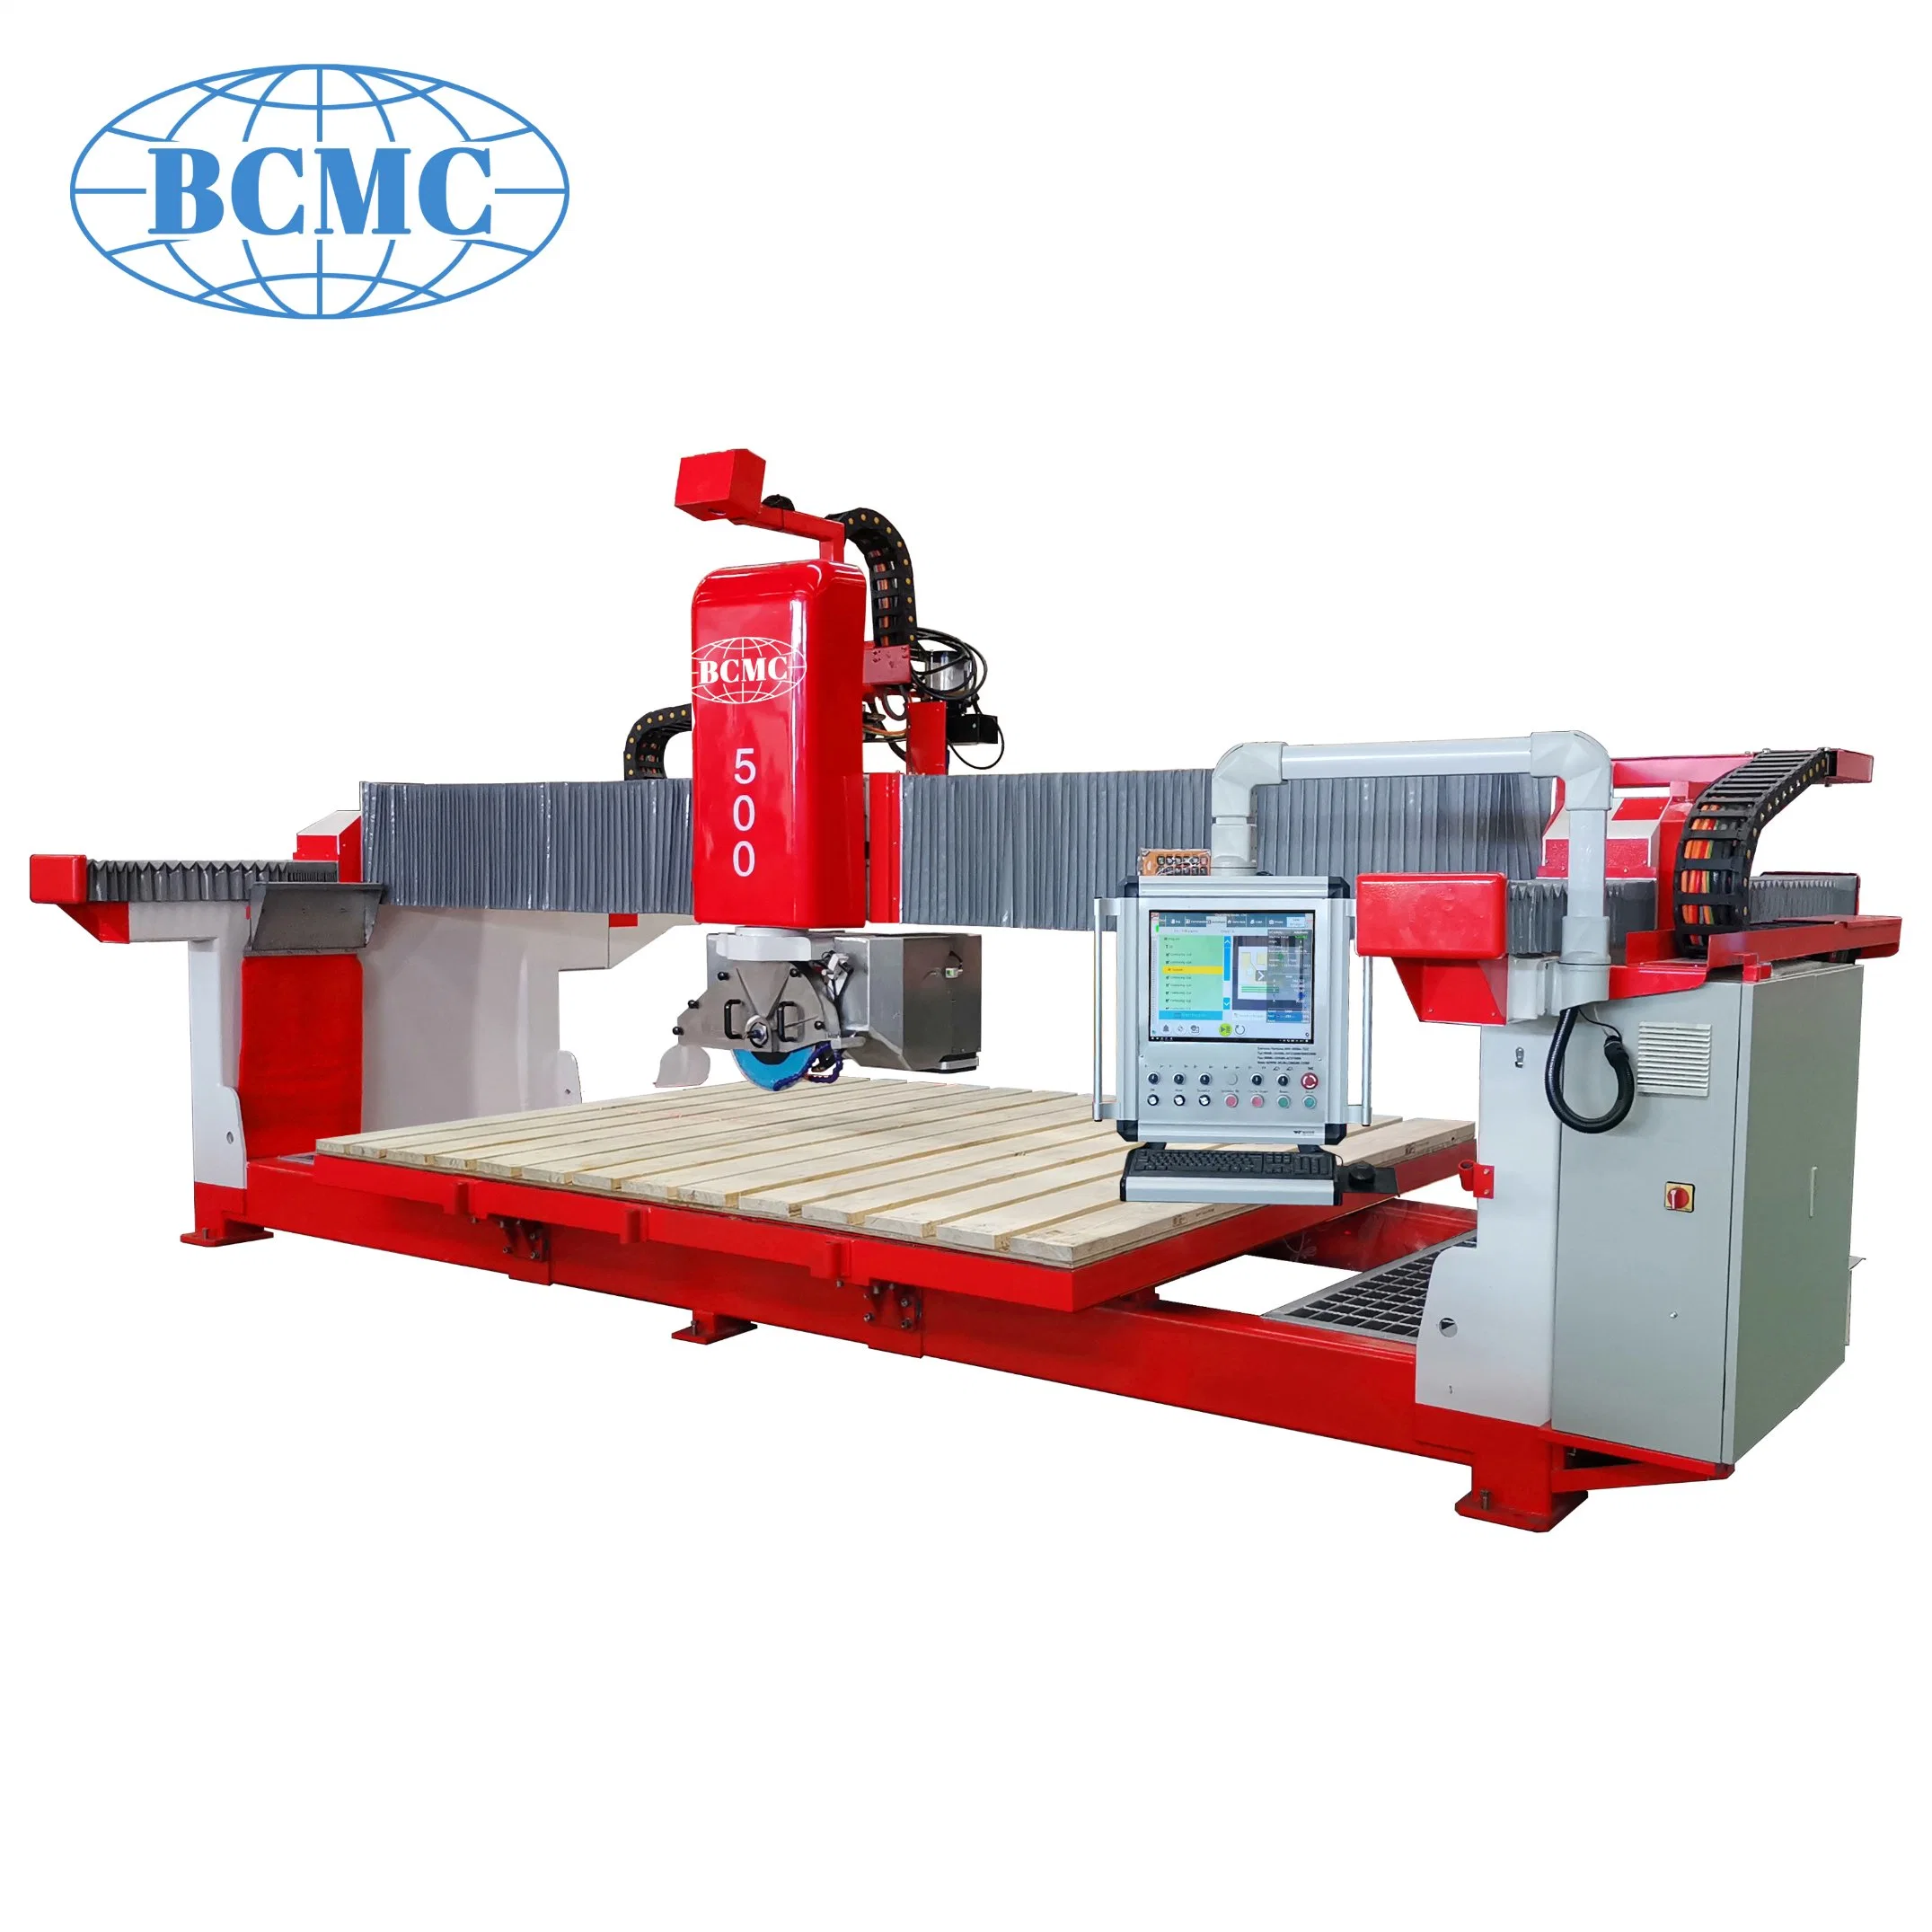 Bcmc 5 Axis CNC Bridge Saw for Stone Italy Esa System Automatic Marble Cutting Machine